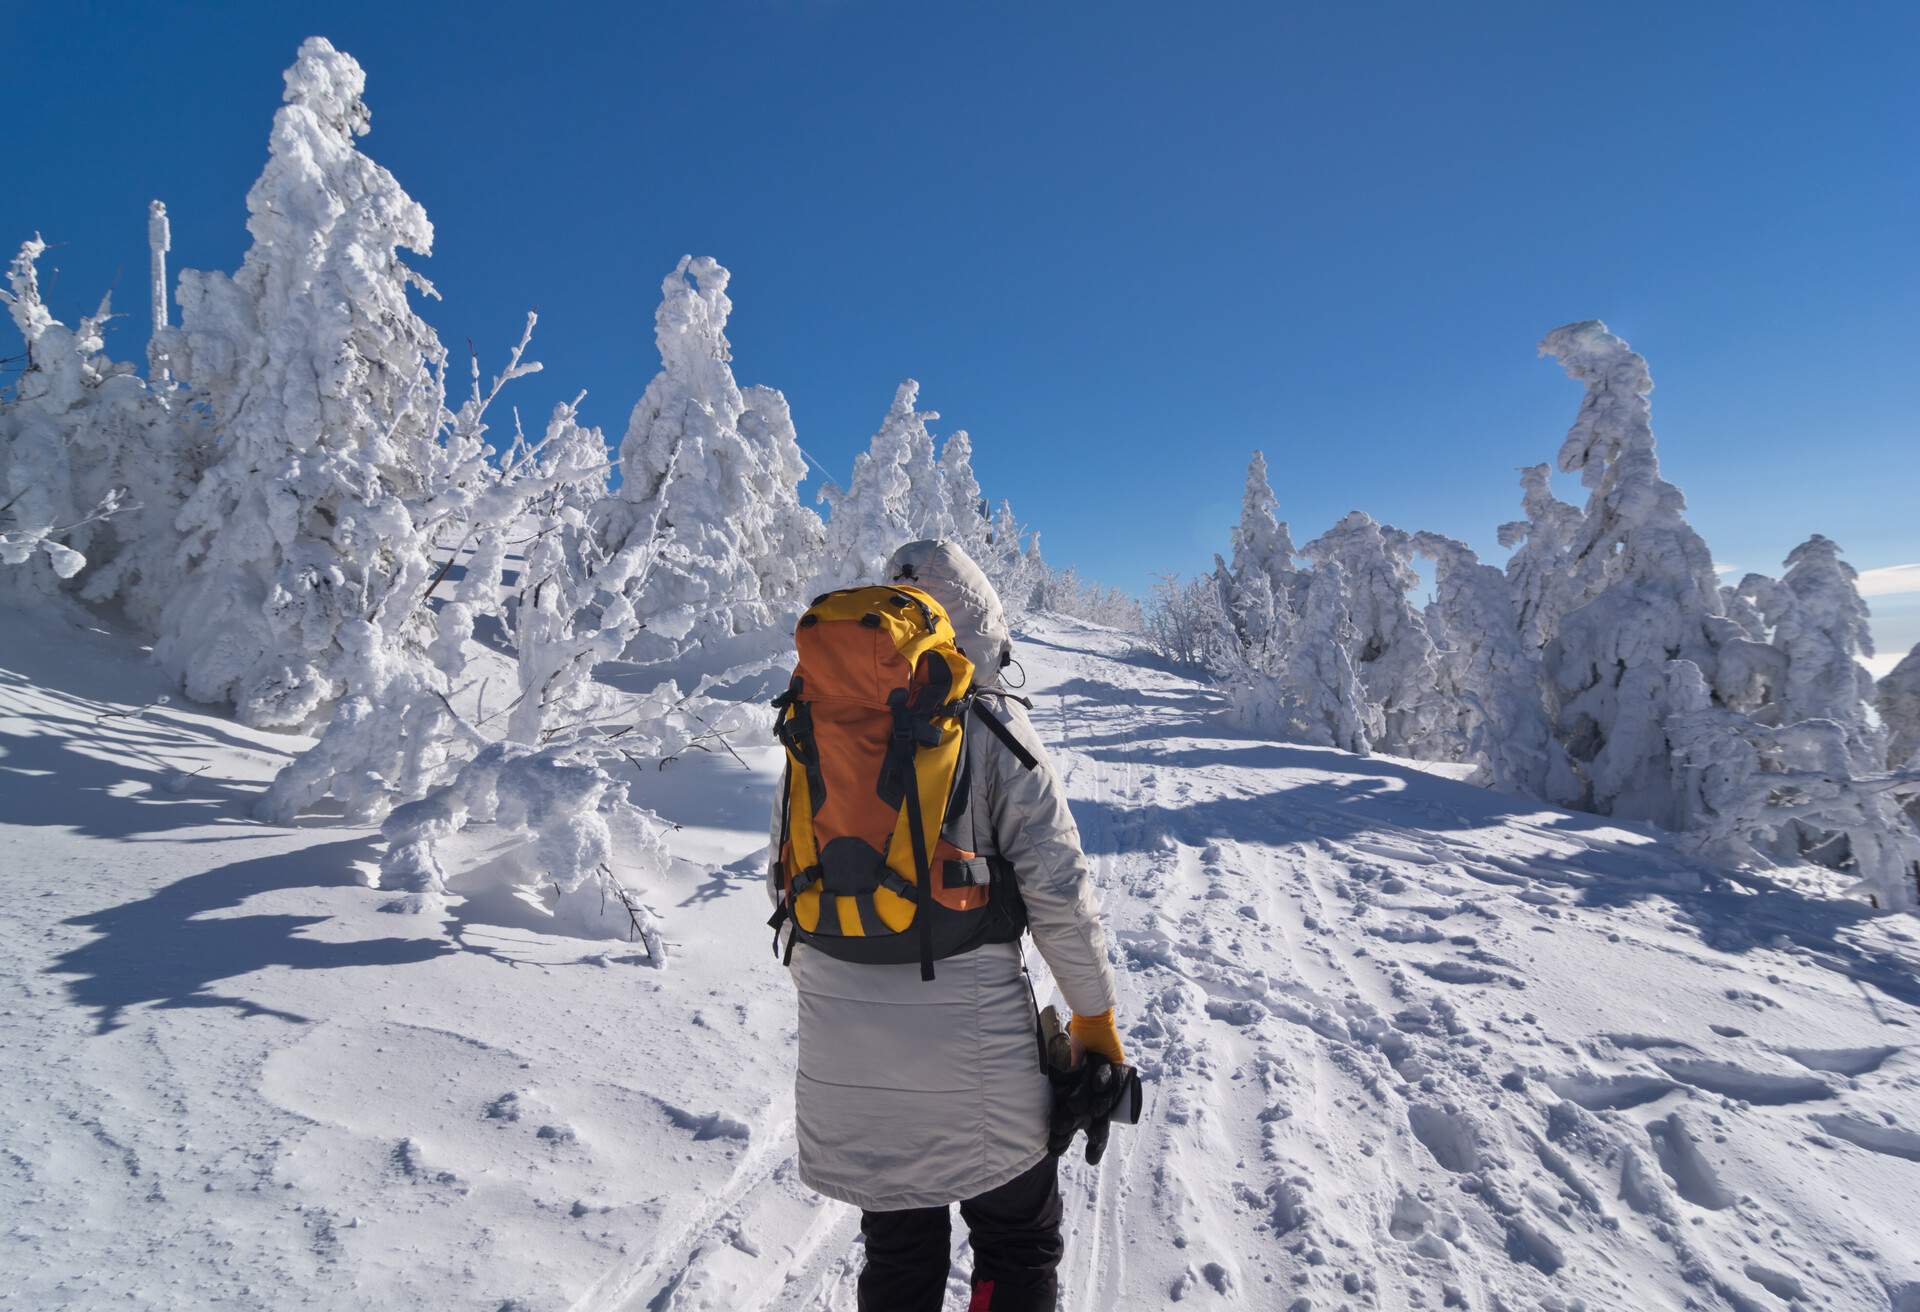 Female hiker making her way up to the summit of Great Arber in wonderful winter landscape, Bavaria, Germany.